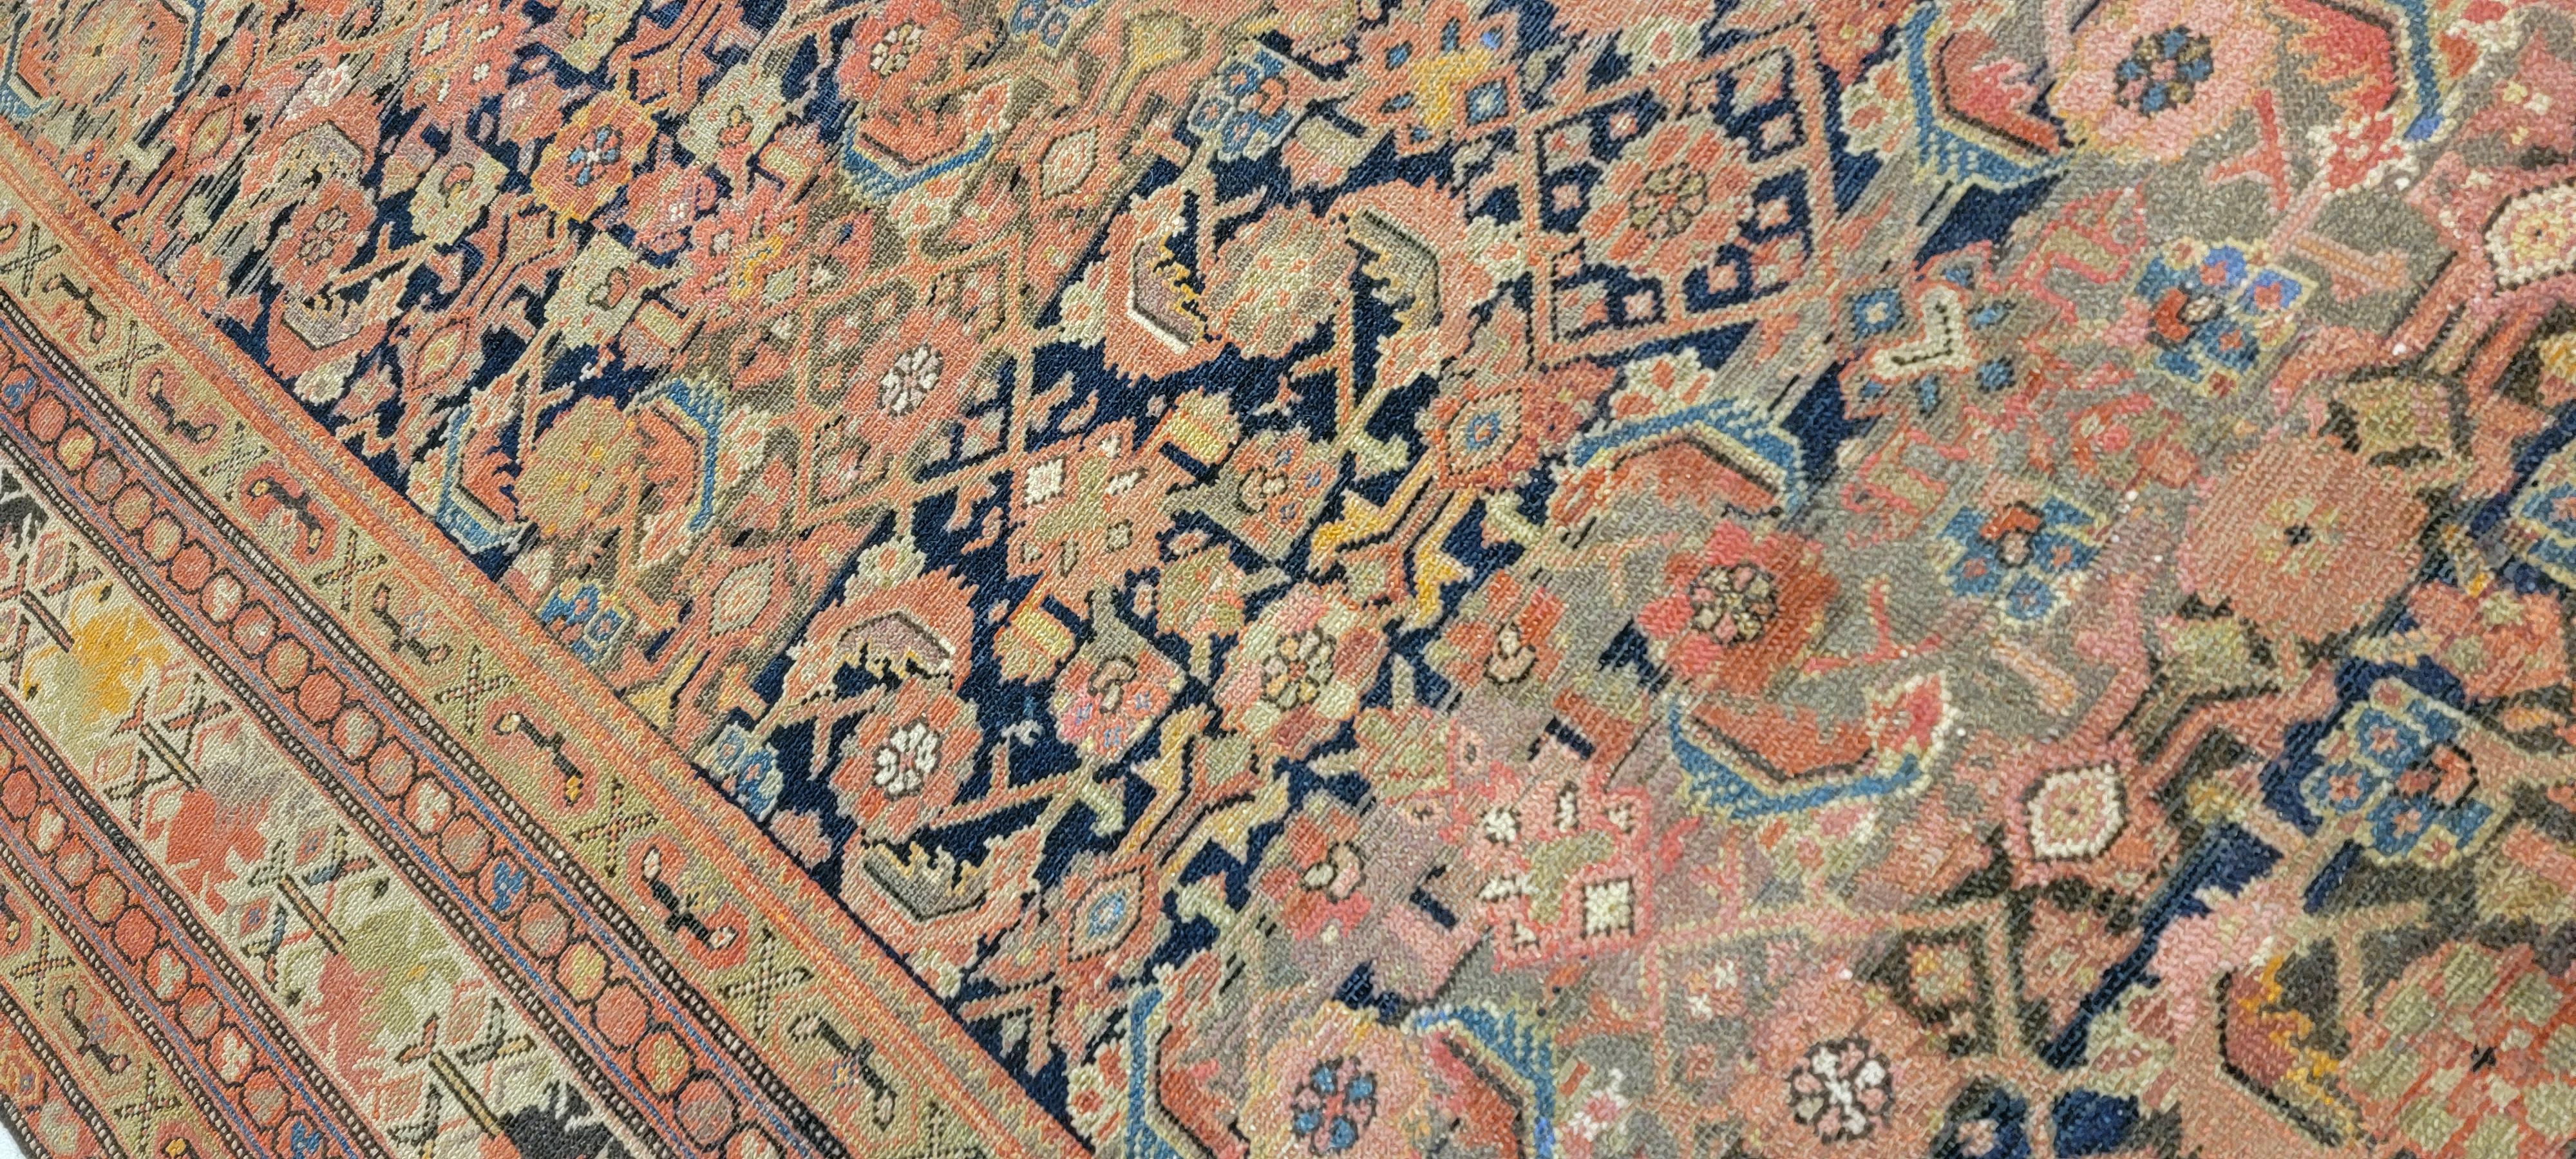 Early 20th Century Antique Persian/Kurdish Malayer Rug For Sale 4